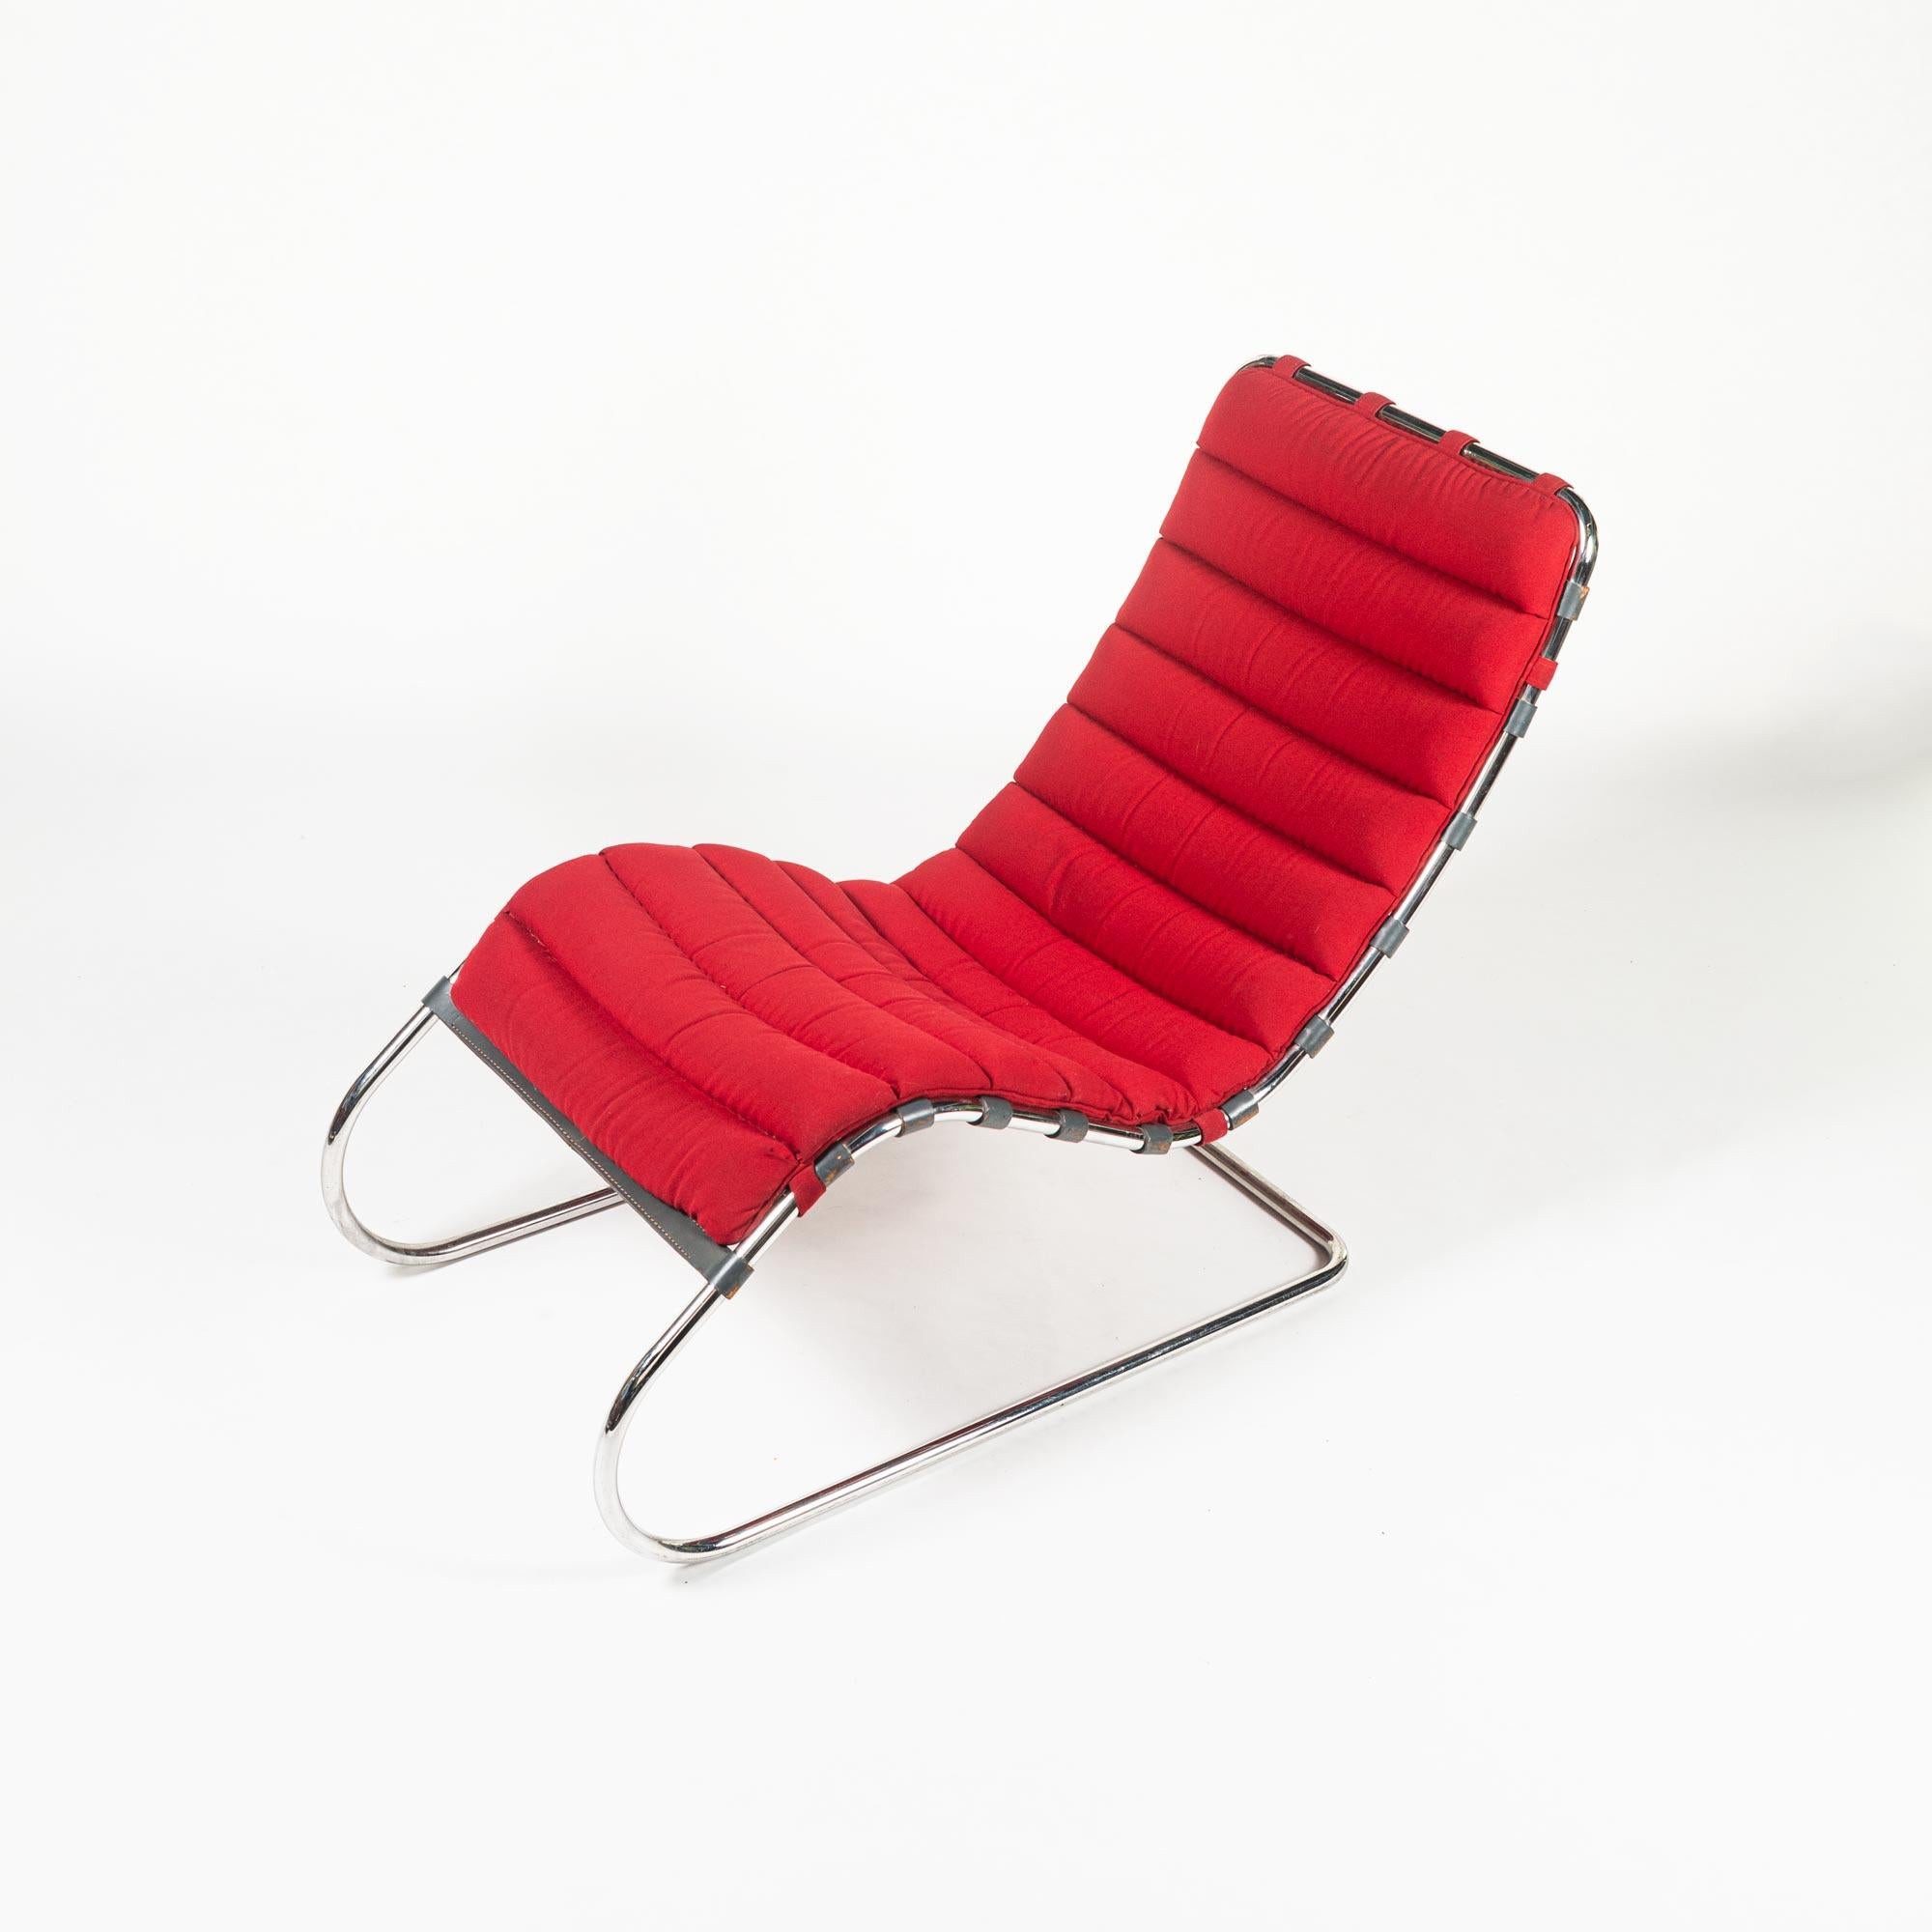 Mies van der Rohe’s MR chaise lounge was designed in 1927. This MR chaise lounge Chair is in original red upholstery fabric cushion with a cantilevered tubular chromed steel frame and leather straps, circa 1985. The listing is for MR chaise lounge